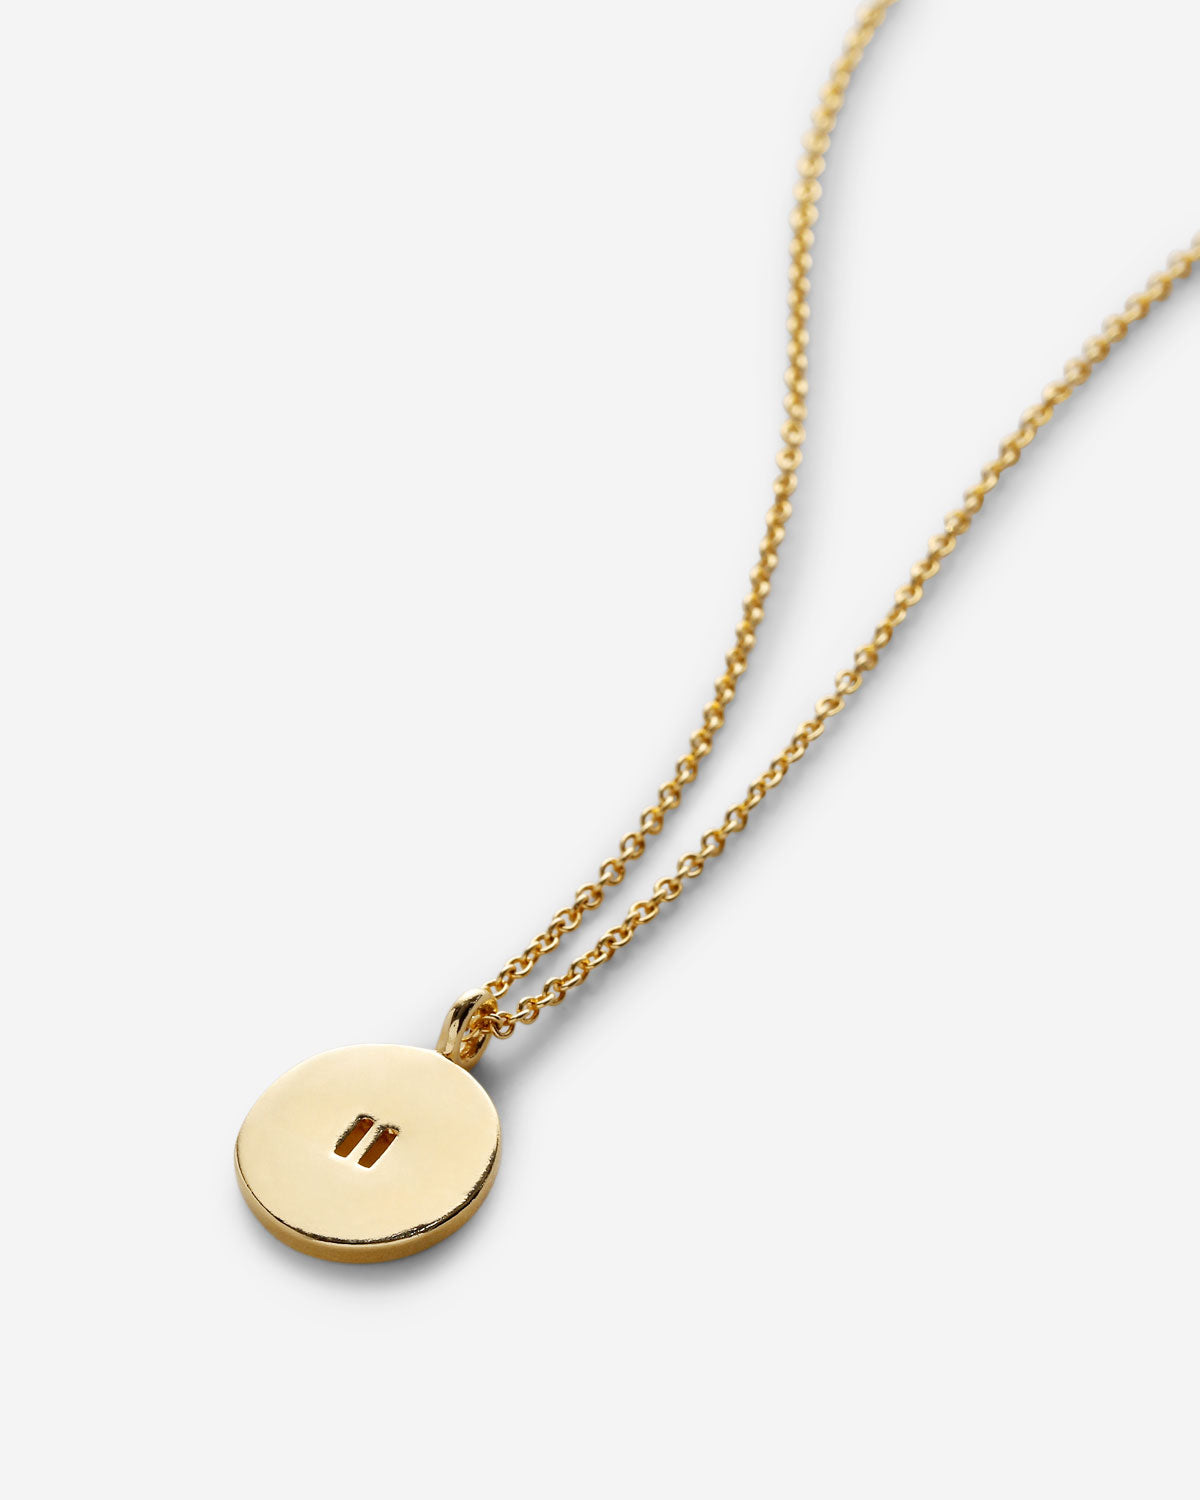 Close-up of Pause Necklace in 14k gold finish